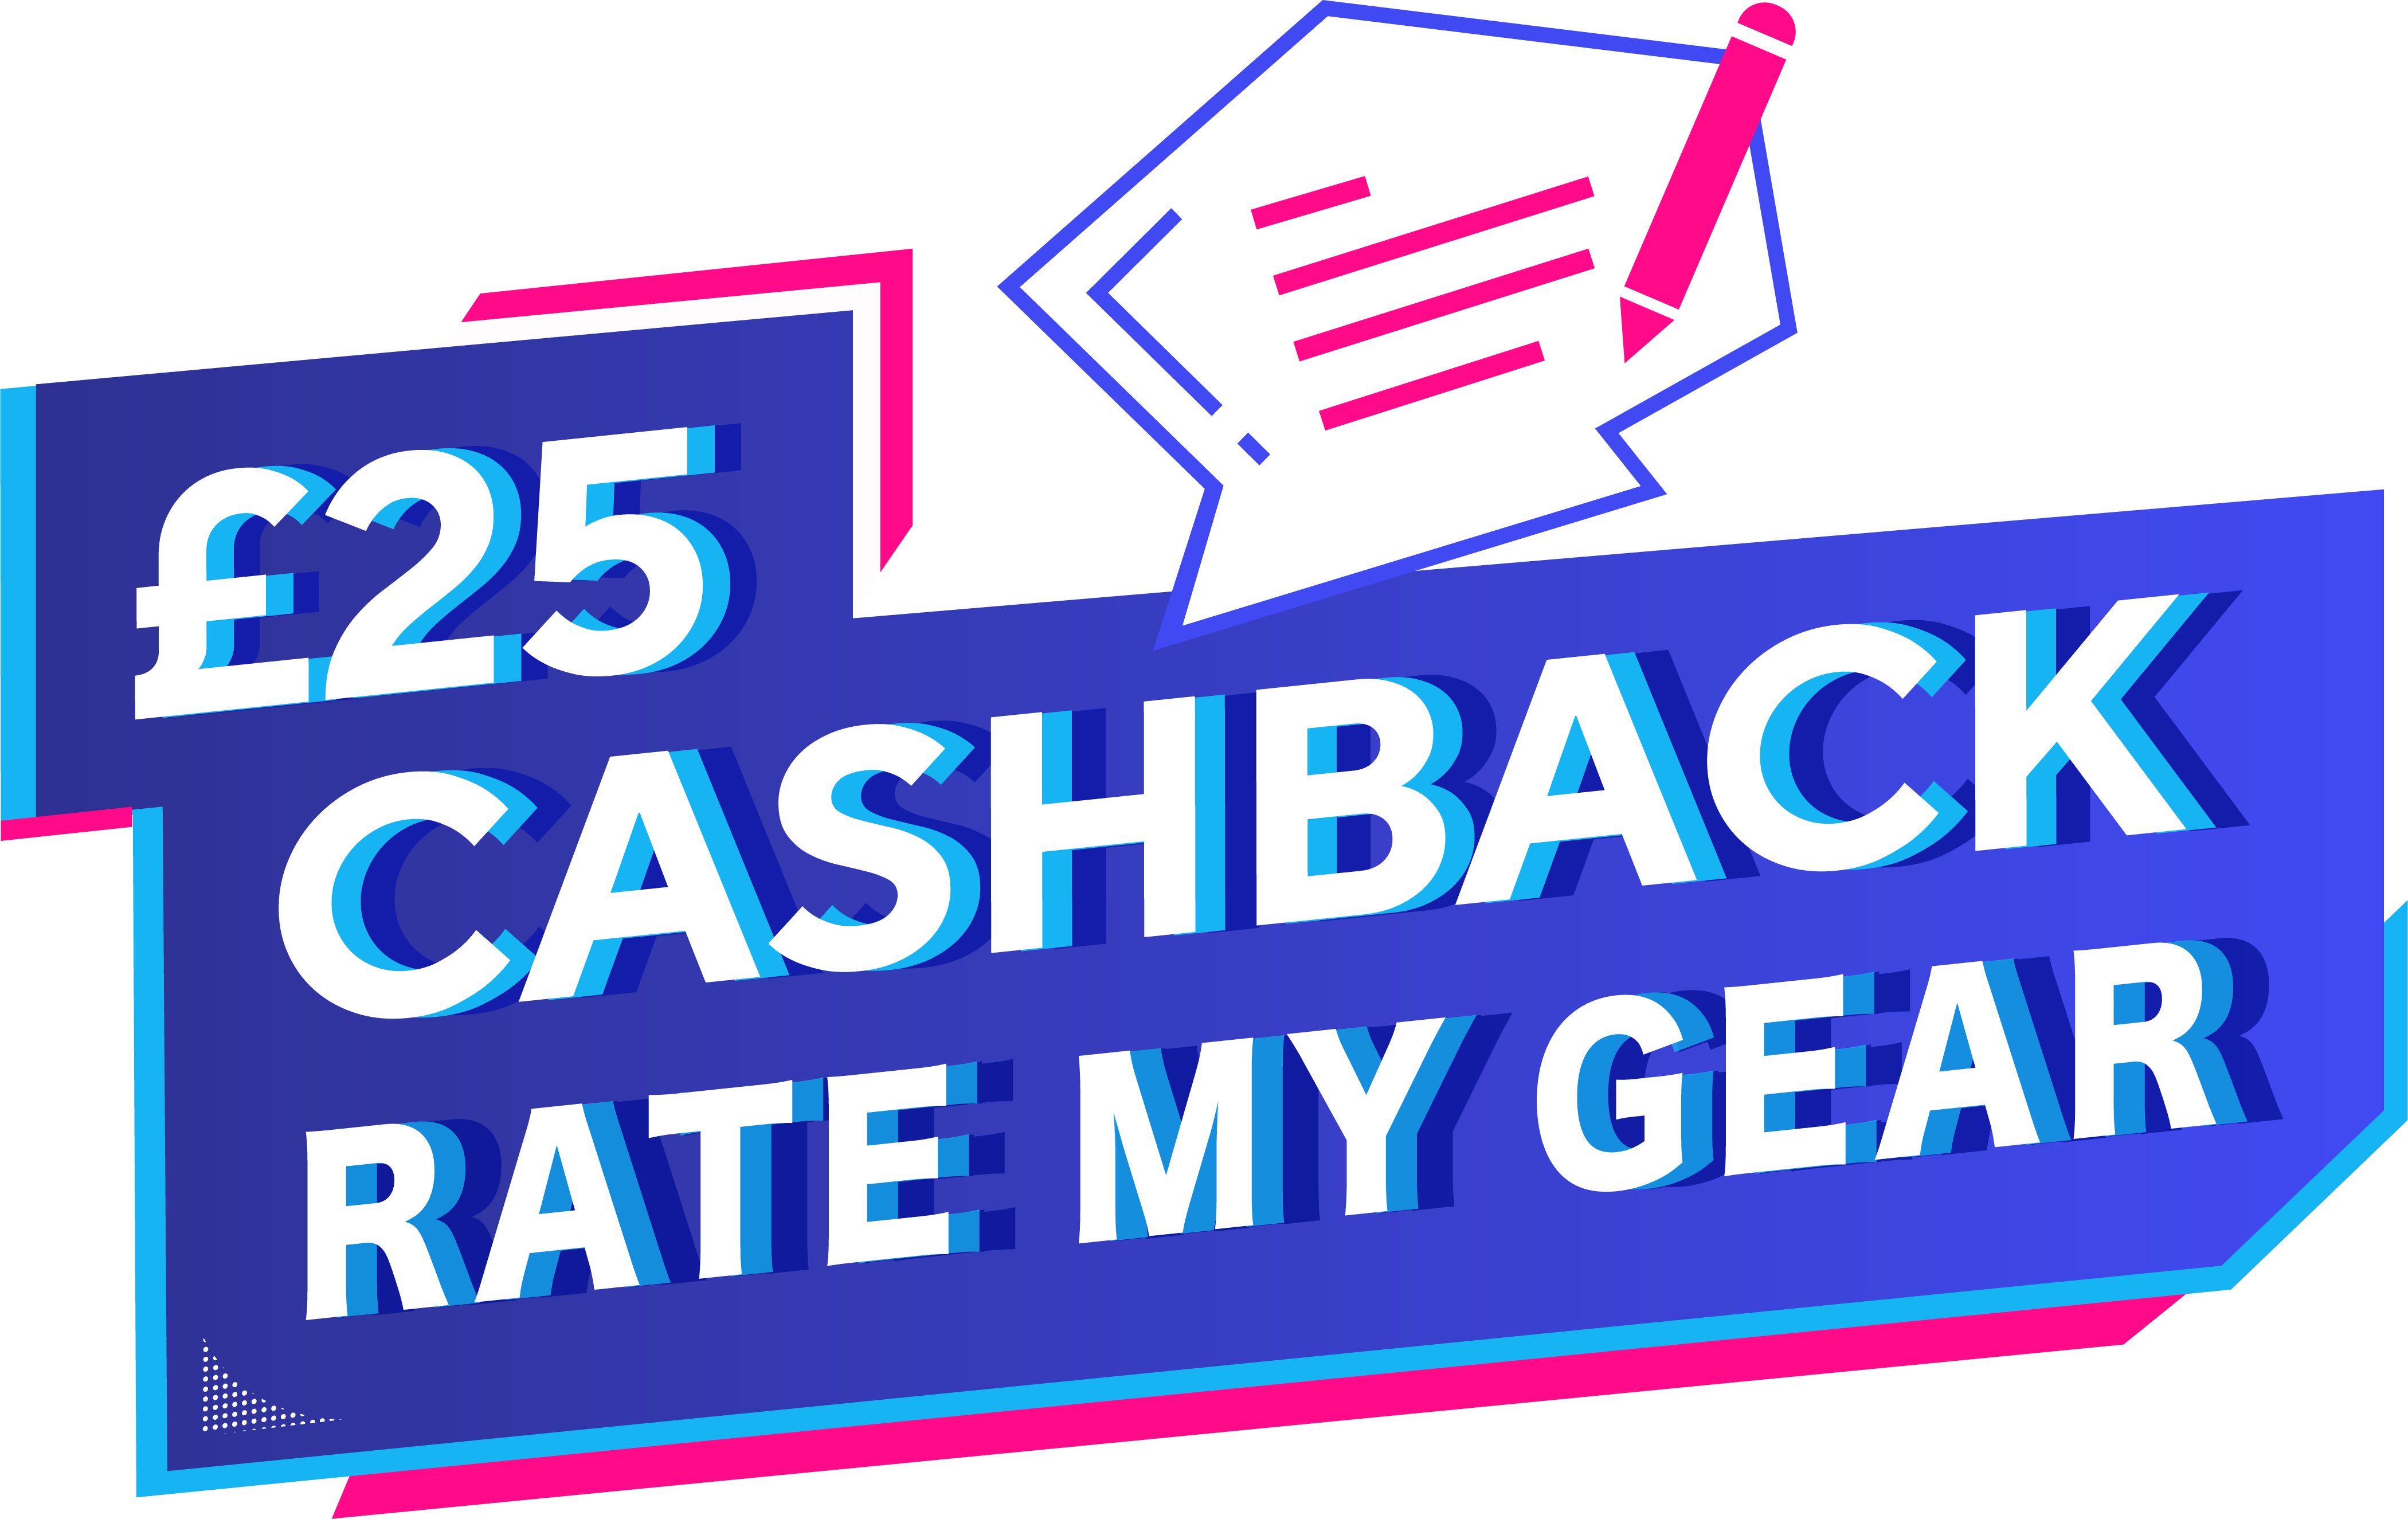 Leave a review, get £25 cashback